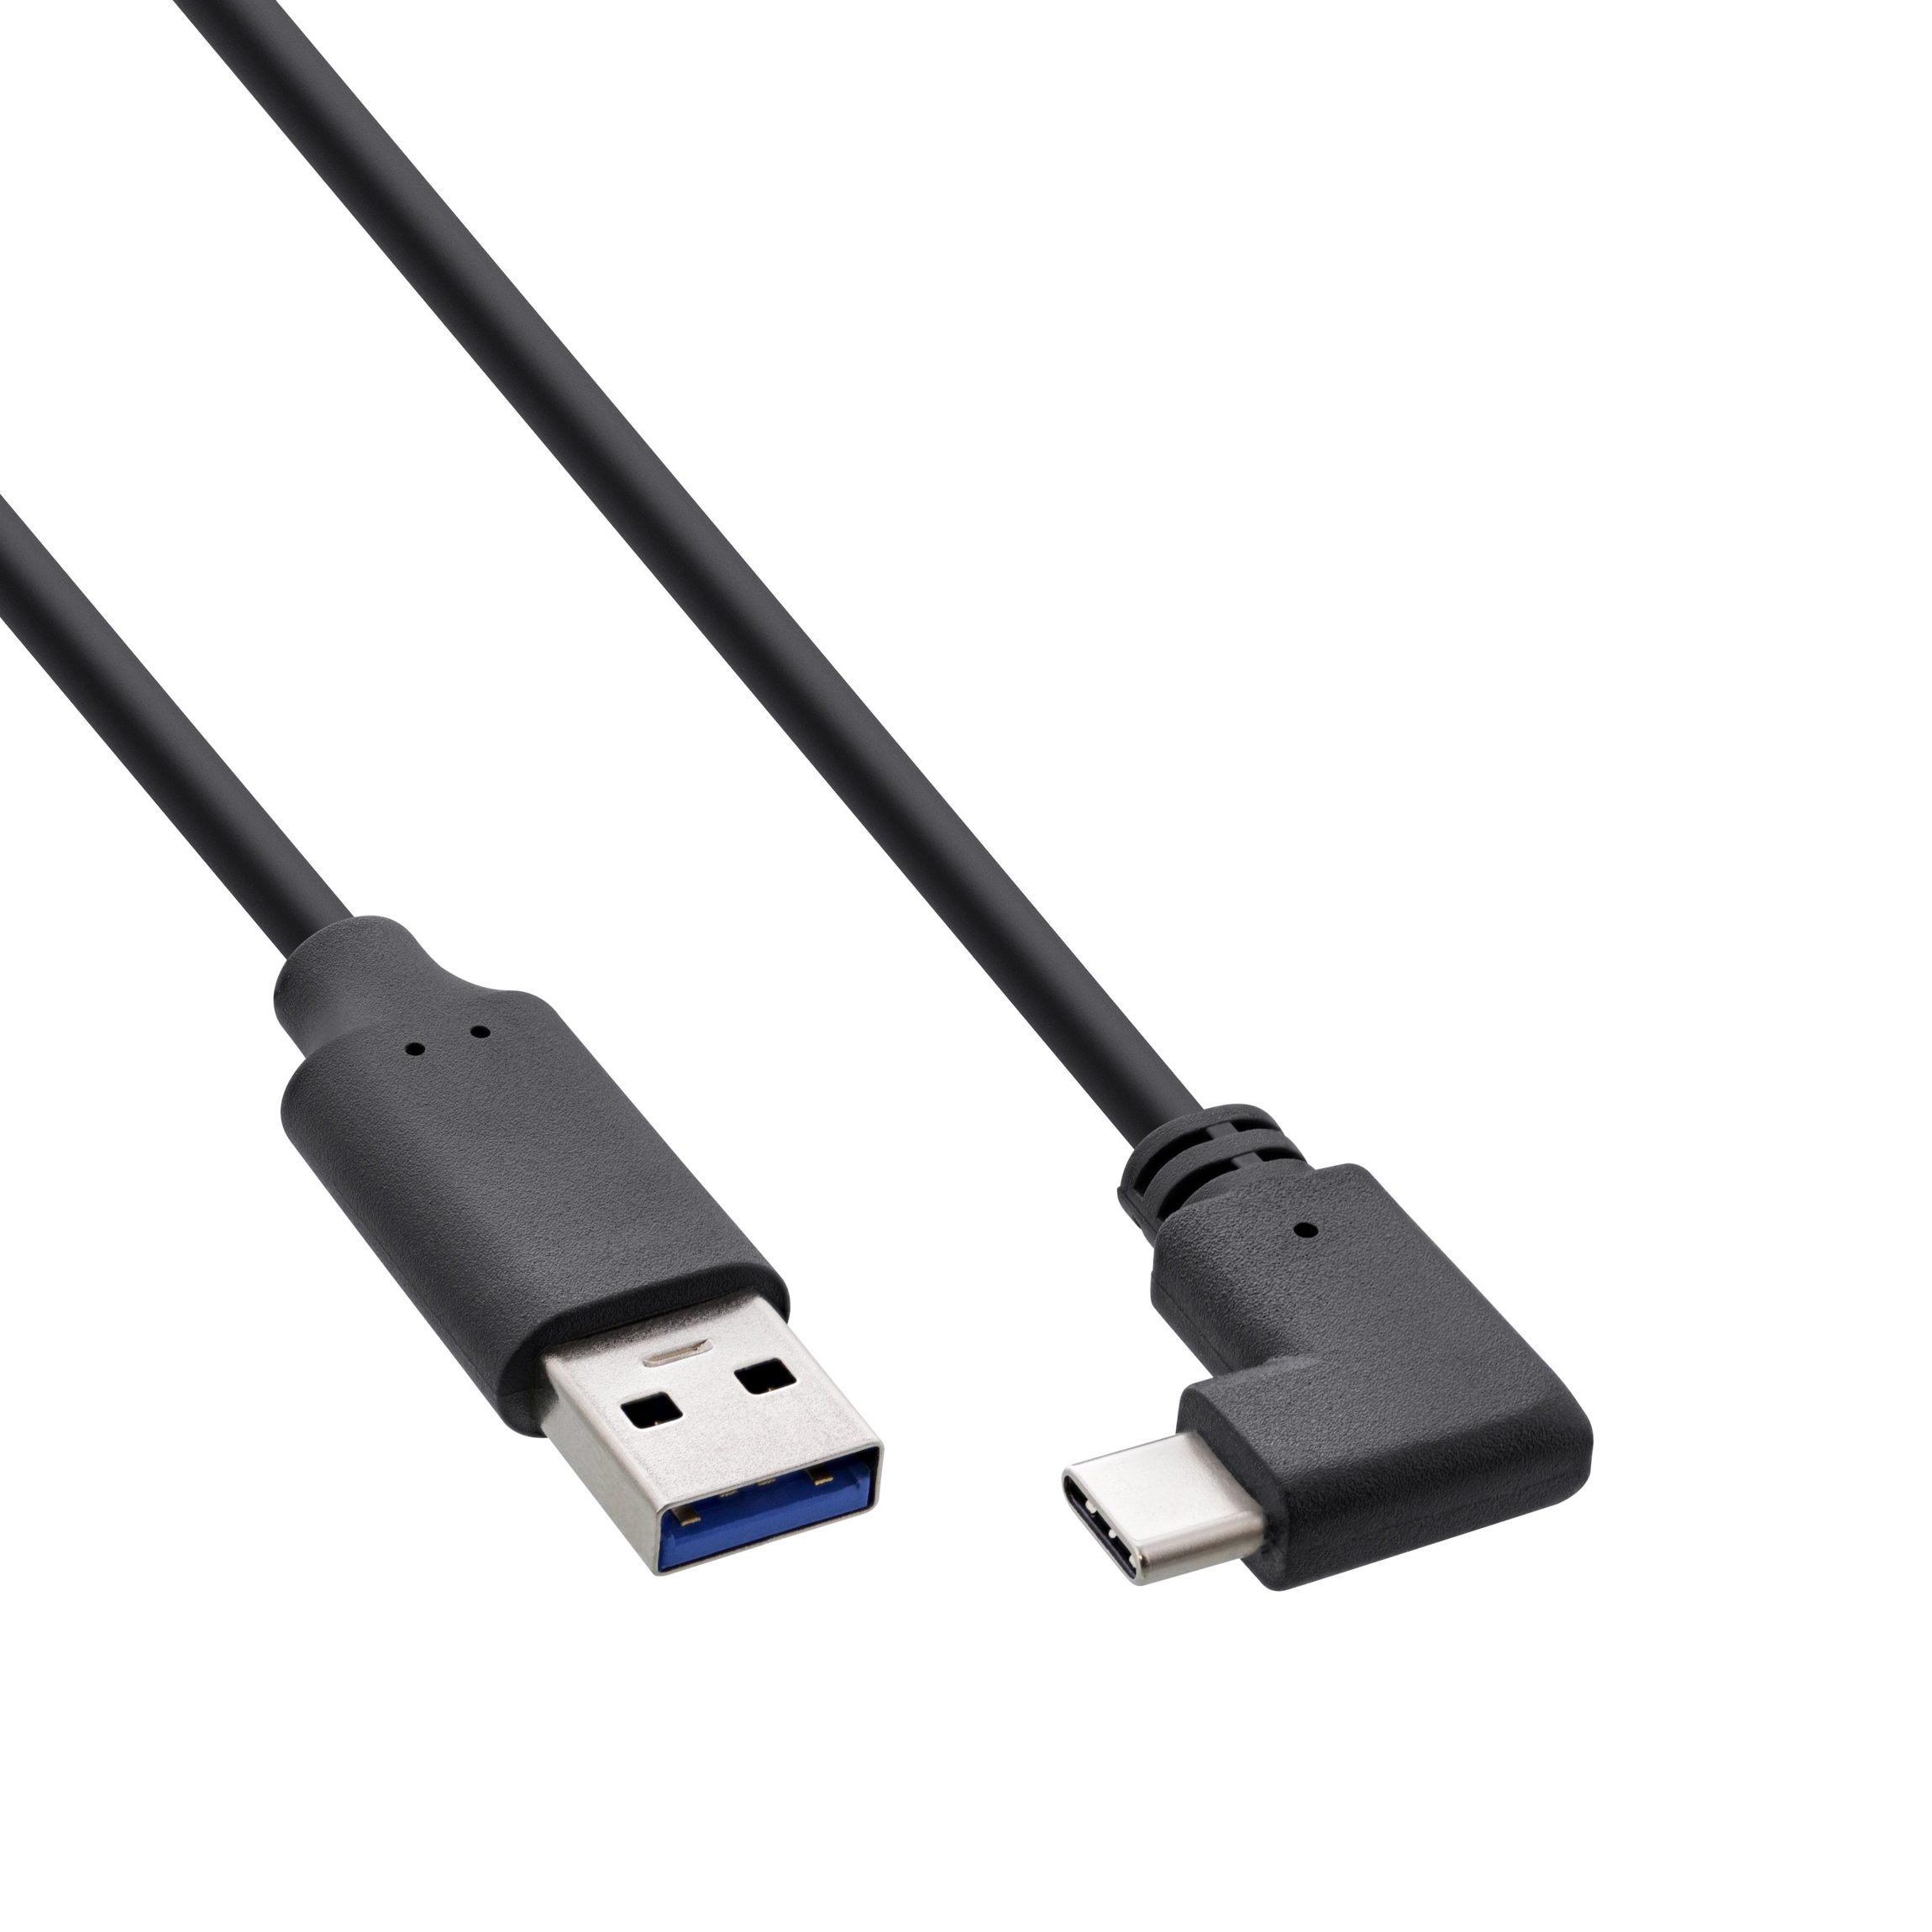 Cable USB Type-C™ male angled to USB 3.0 A male 50cm